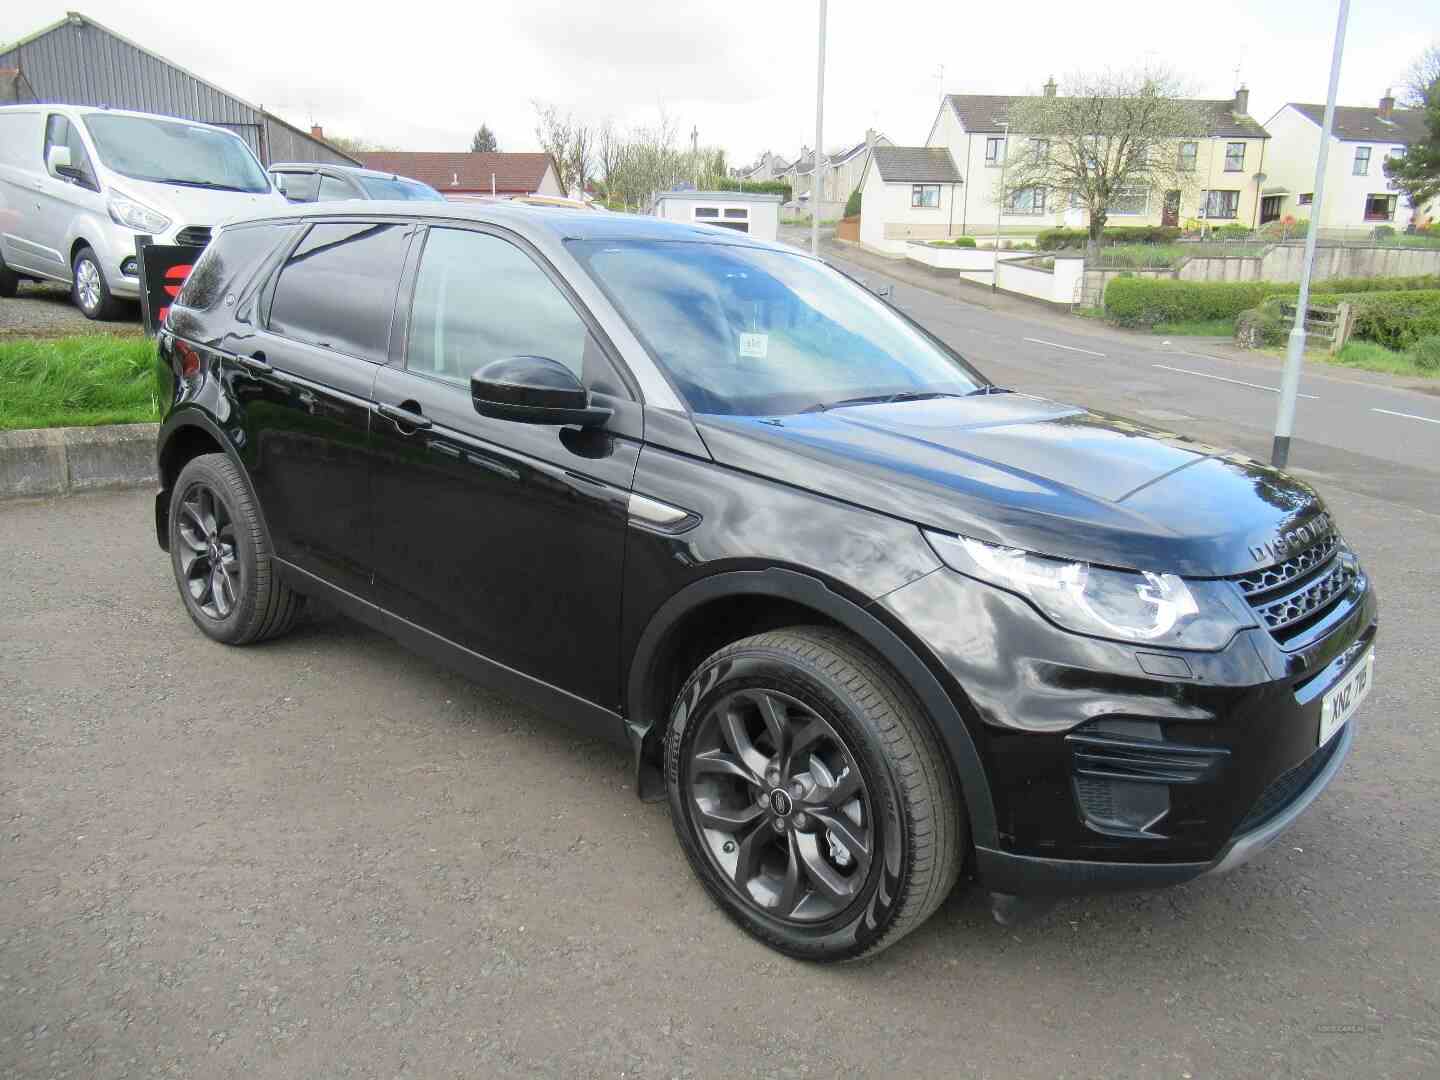 Land Rover, Discovery Sport, 2018, 2.0 TD4 180 SE 5dr Auto. Timing chain changed, local owned NI car from new